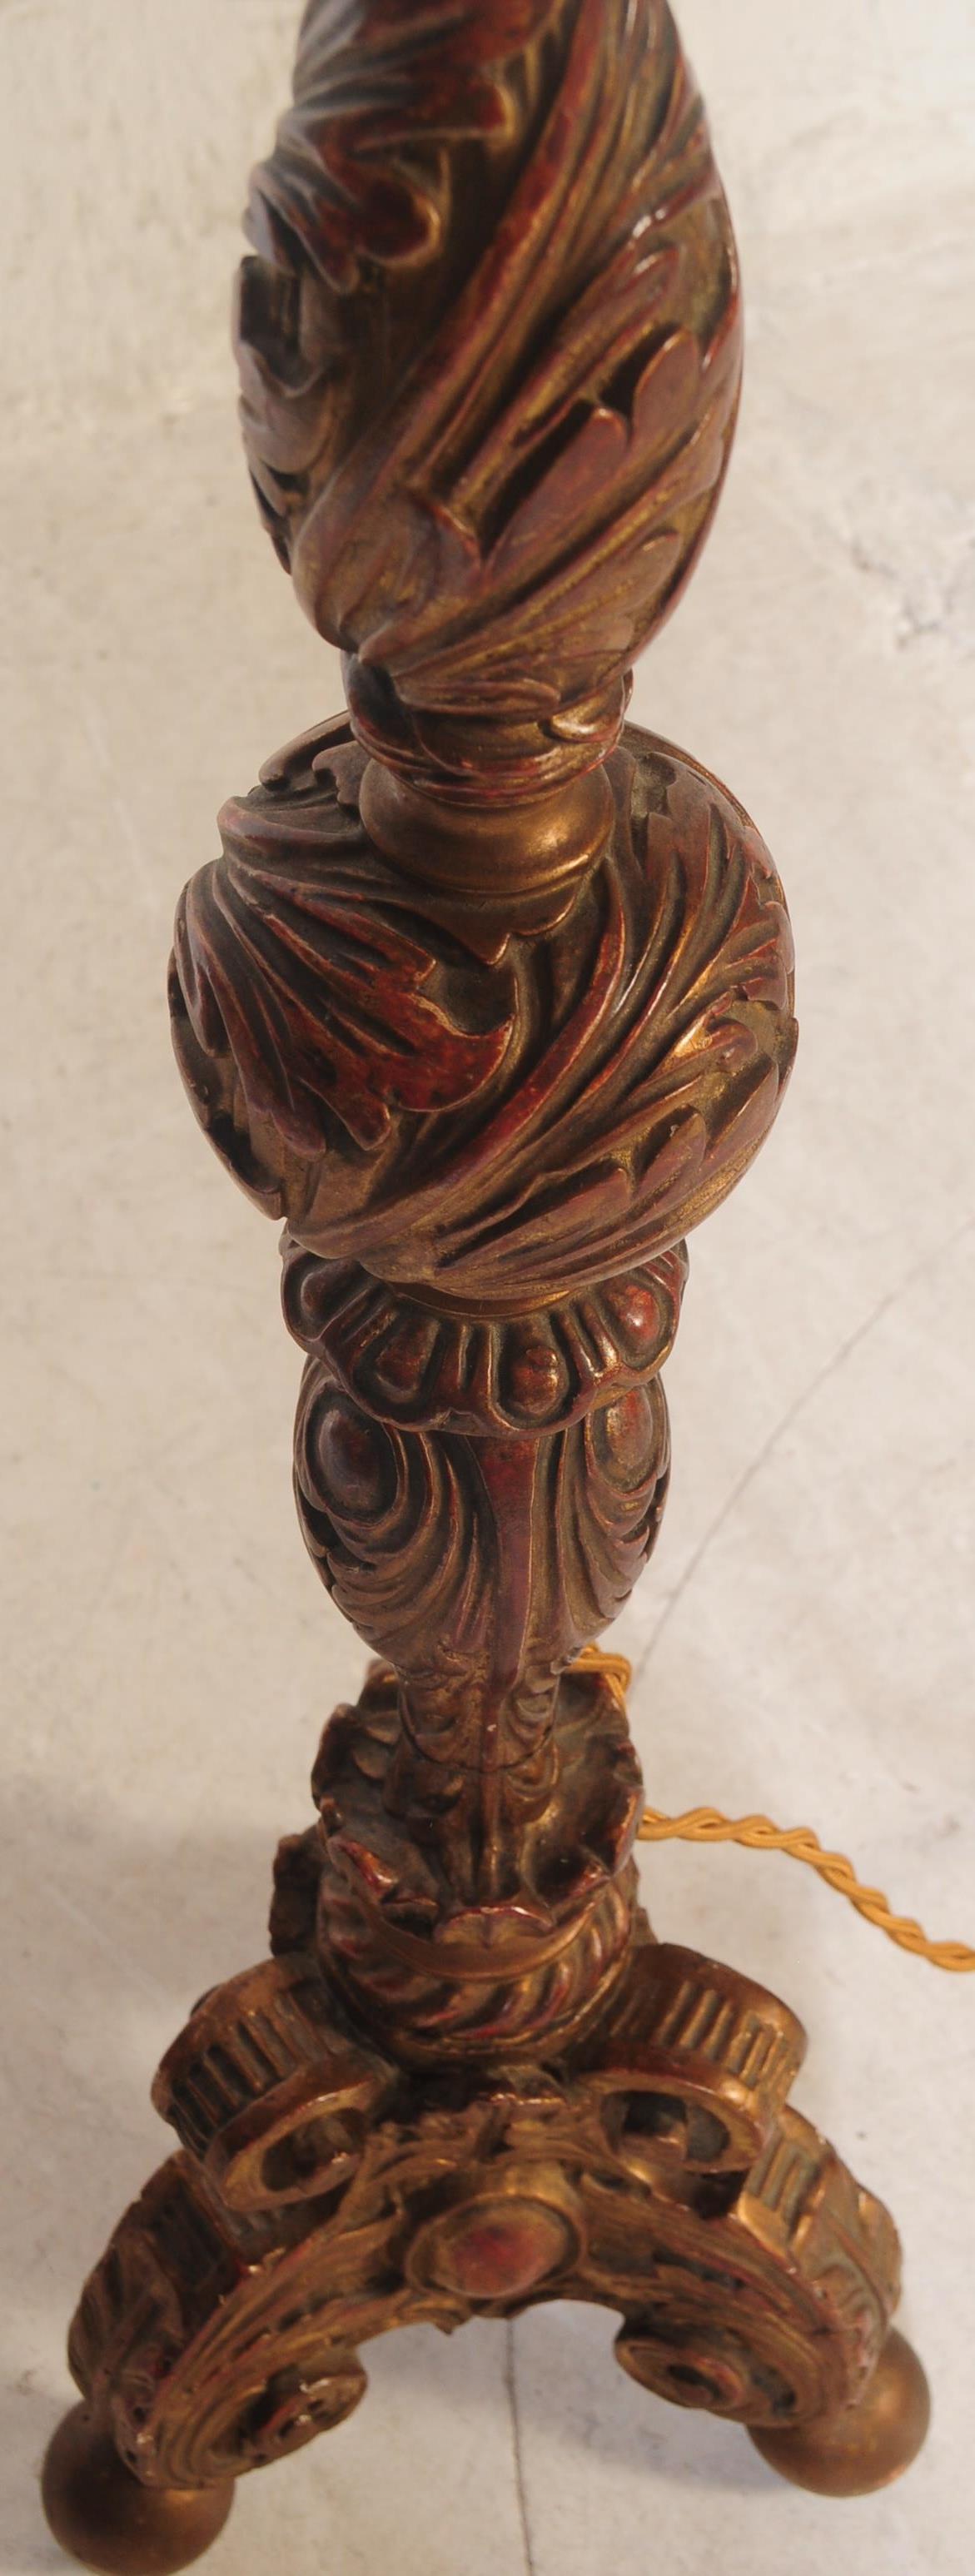 LARGE 20TH CENTURY CARVED WOOD ROCOCO STANDARD LAMP - Image 3 of 4